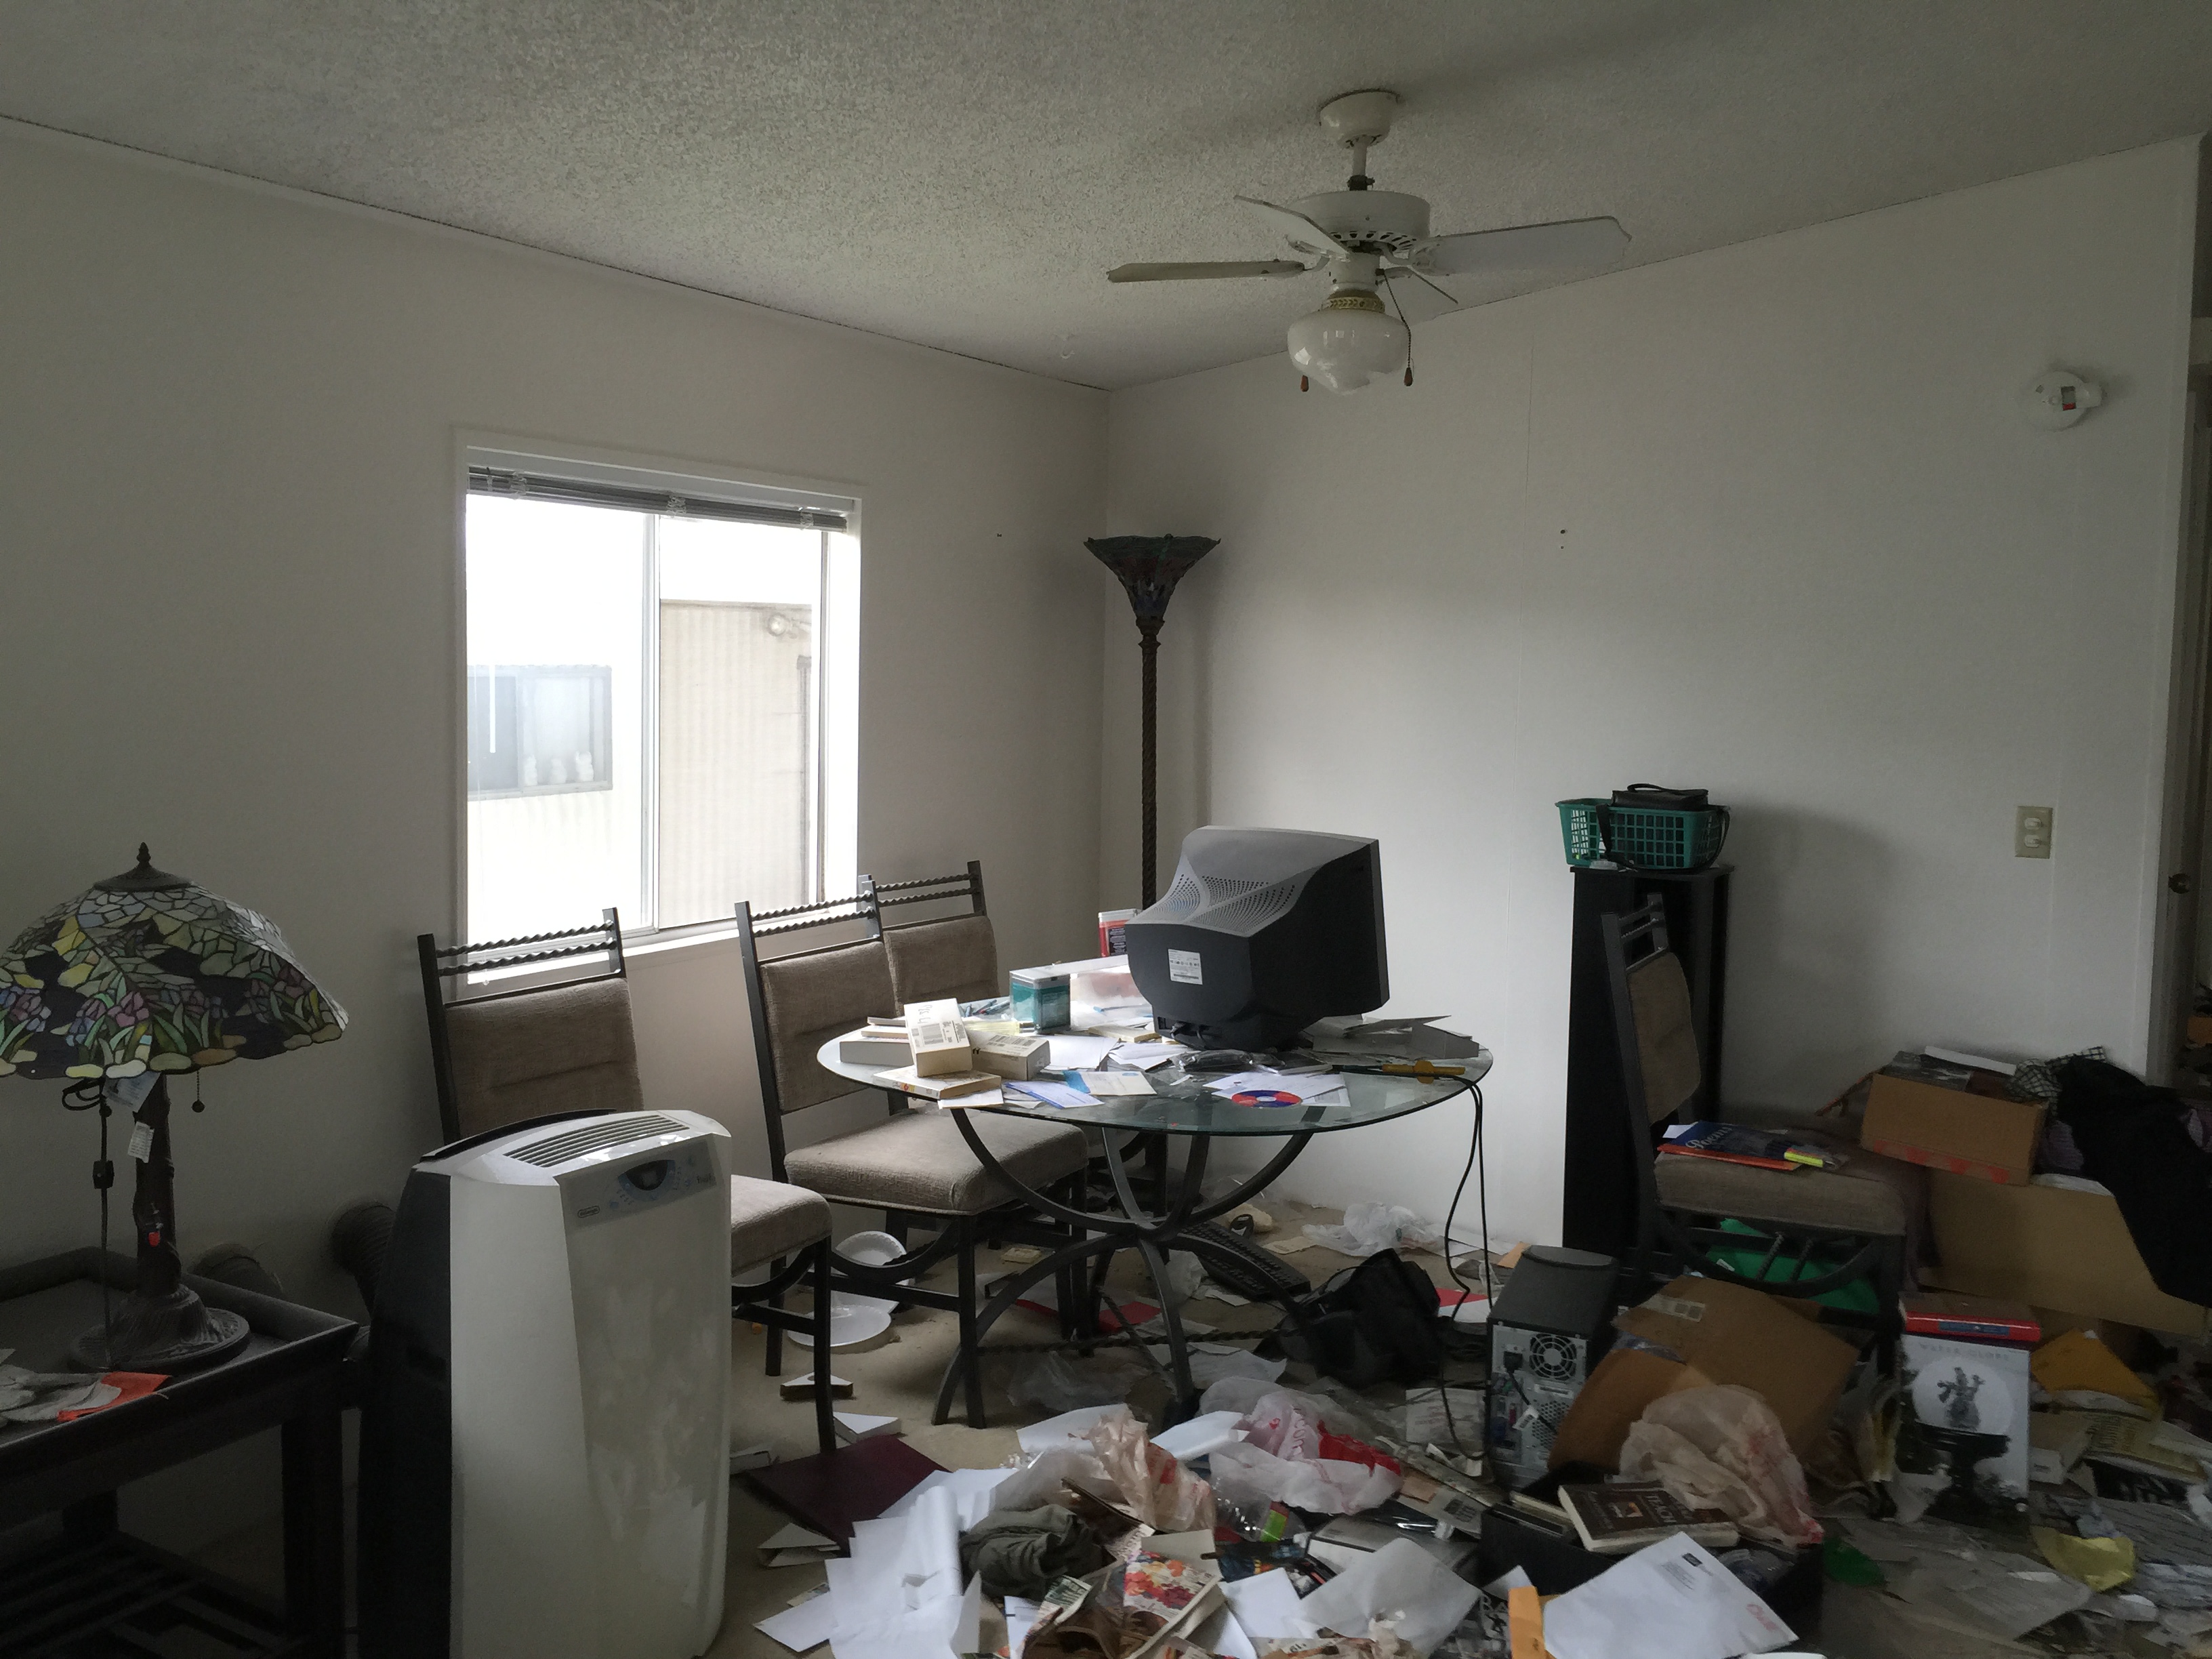 hoarder cleaning agoura hills